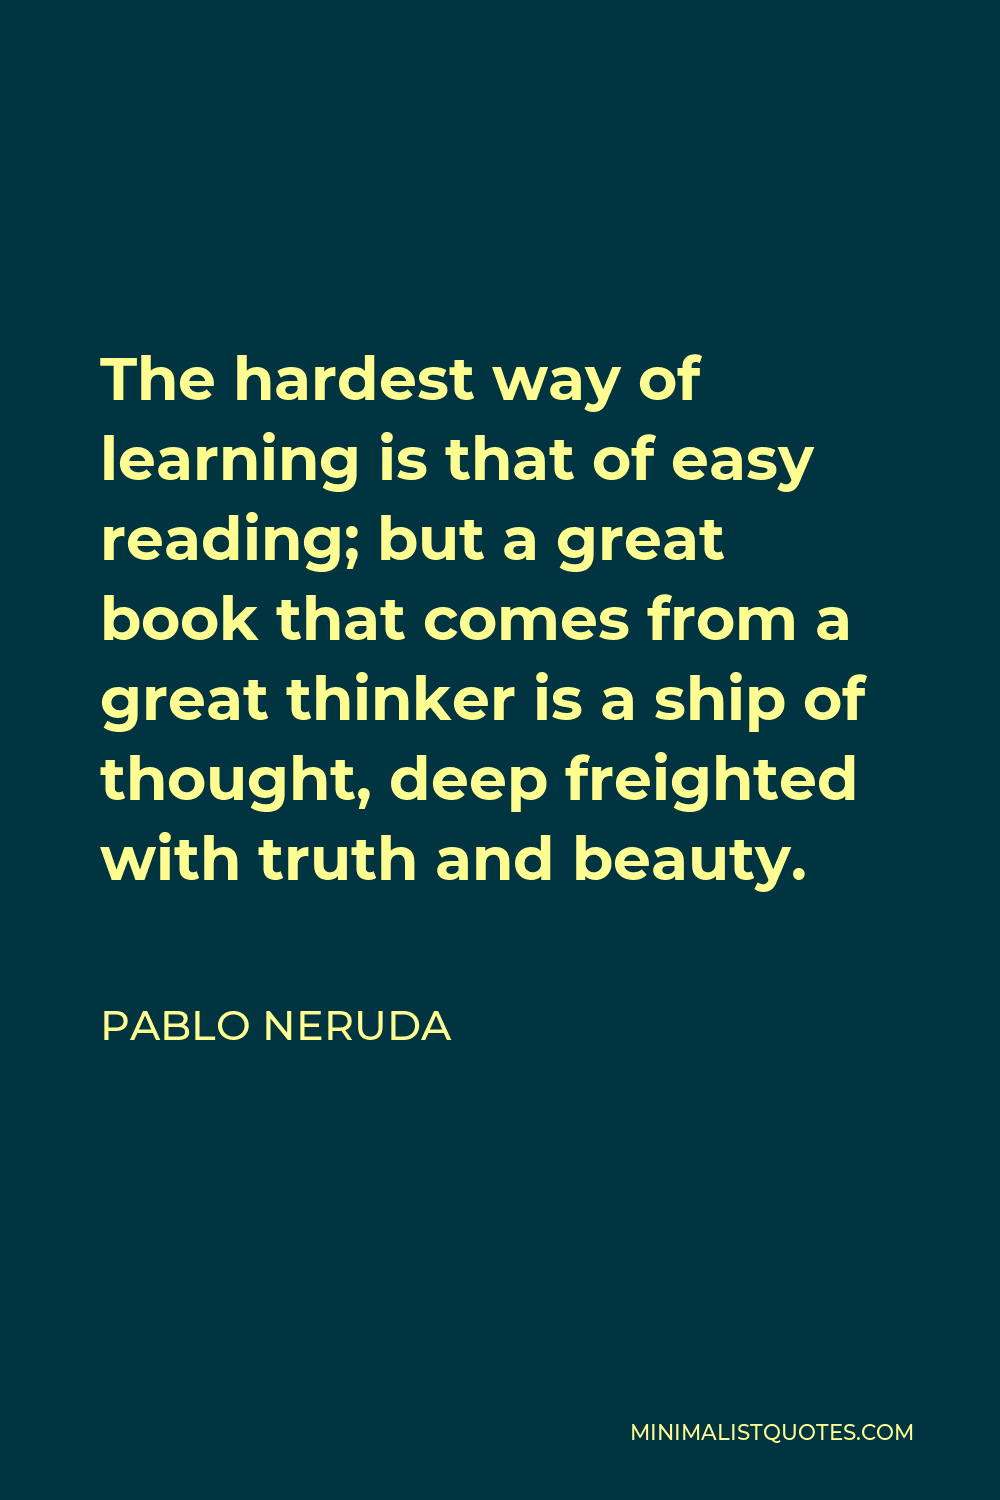 Pablo Neruda Quote - The hardest way of learning is that of easy reading; but a great book that comes from a great thinker is a ship of thought, deep freighted with truth and beauty.